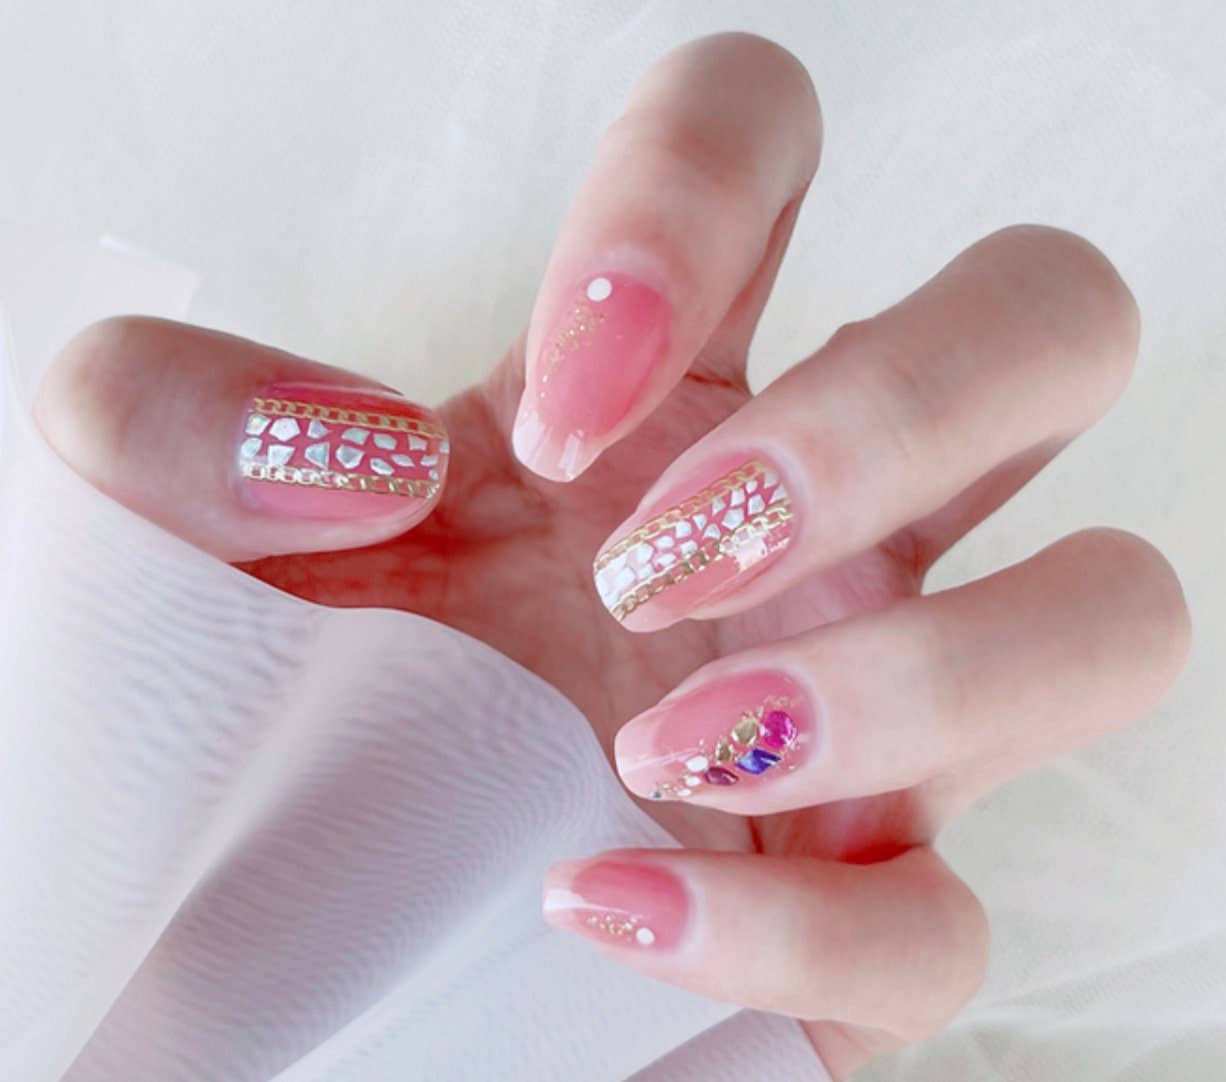 Wholesale Nail Supplies & Products Online - NSI Australia